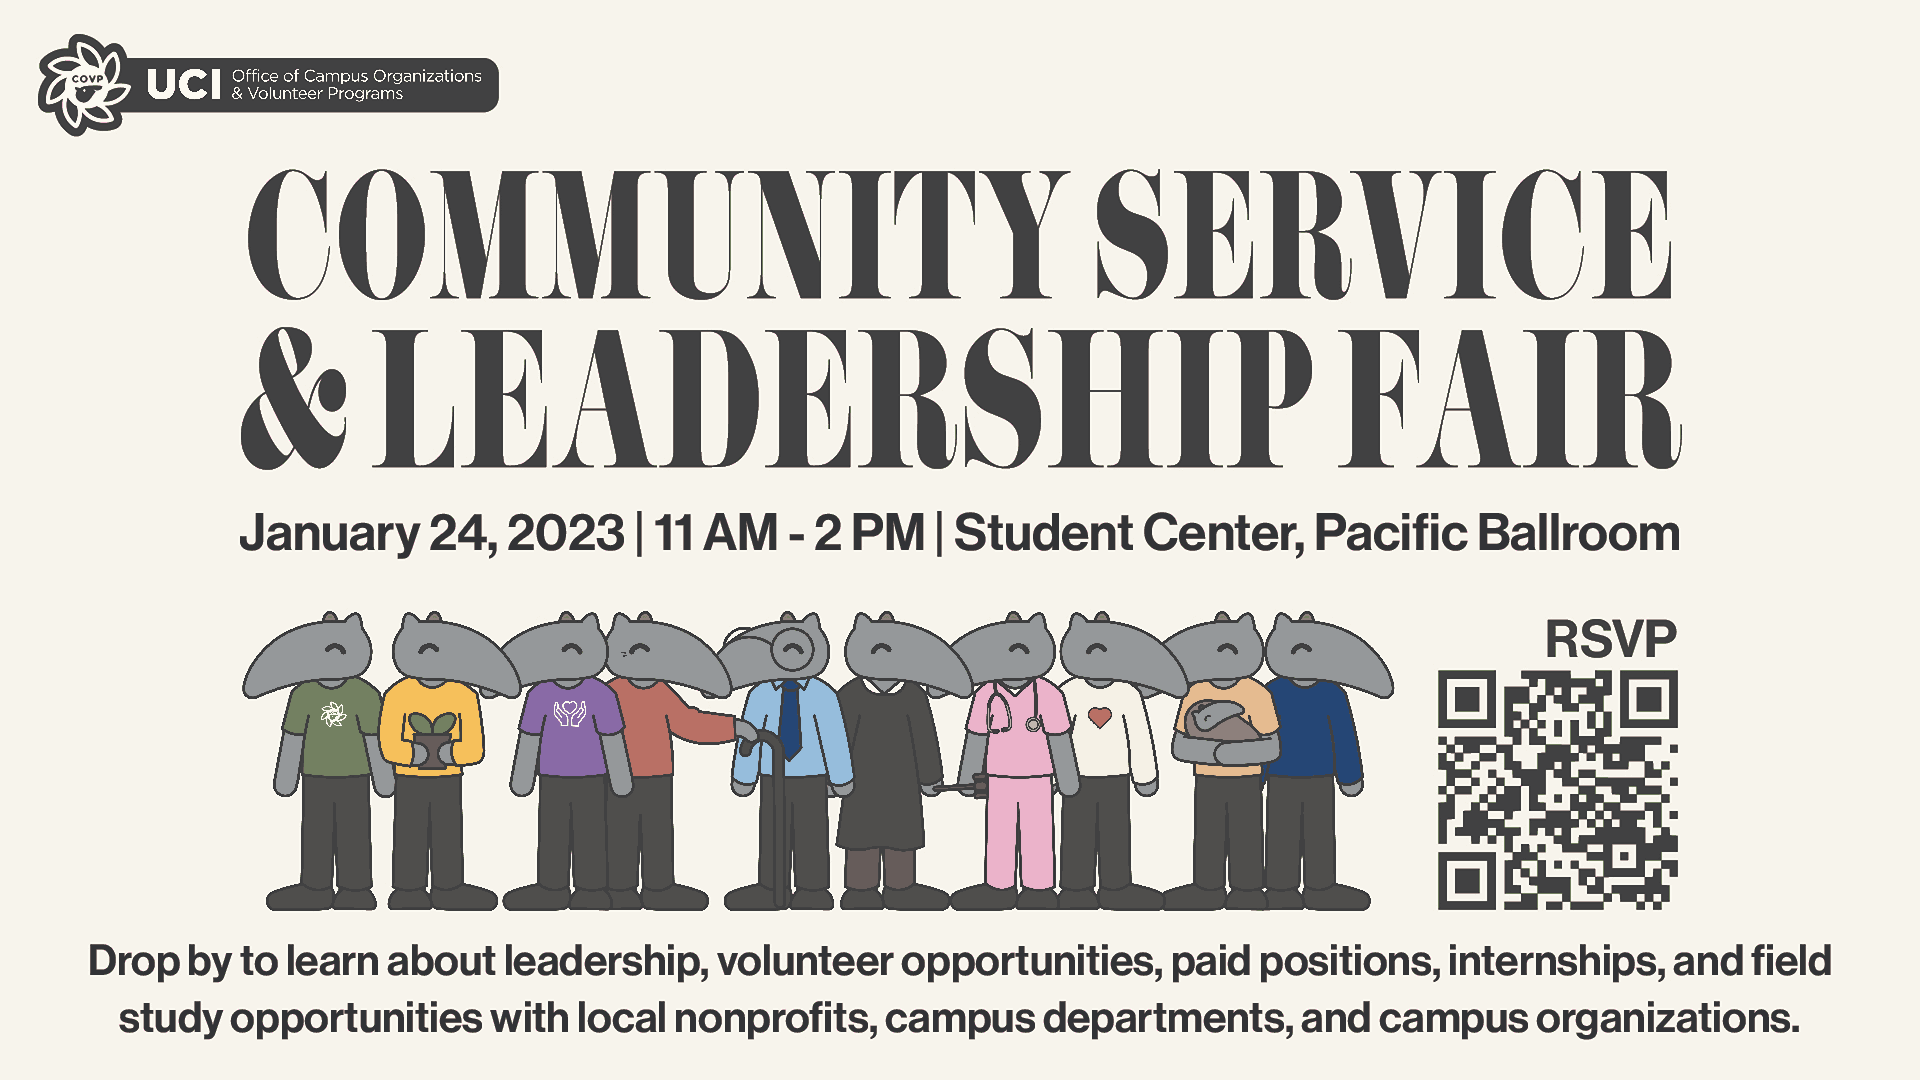 Community Service & Leadership Fair Week 4 February 1, 2023 from 11am - 2pm at the Newkirk Alumni Center